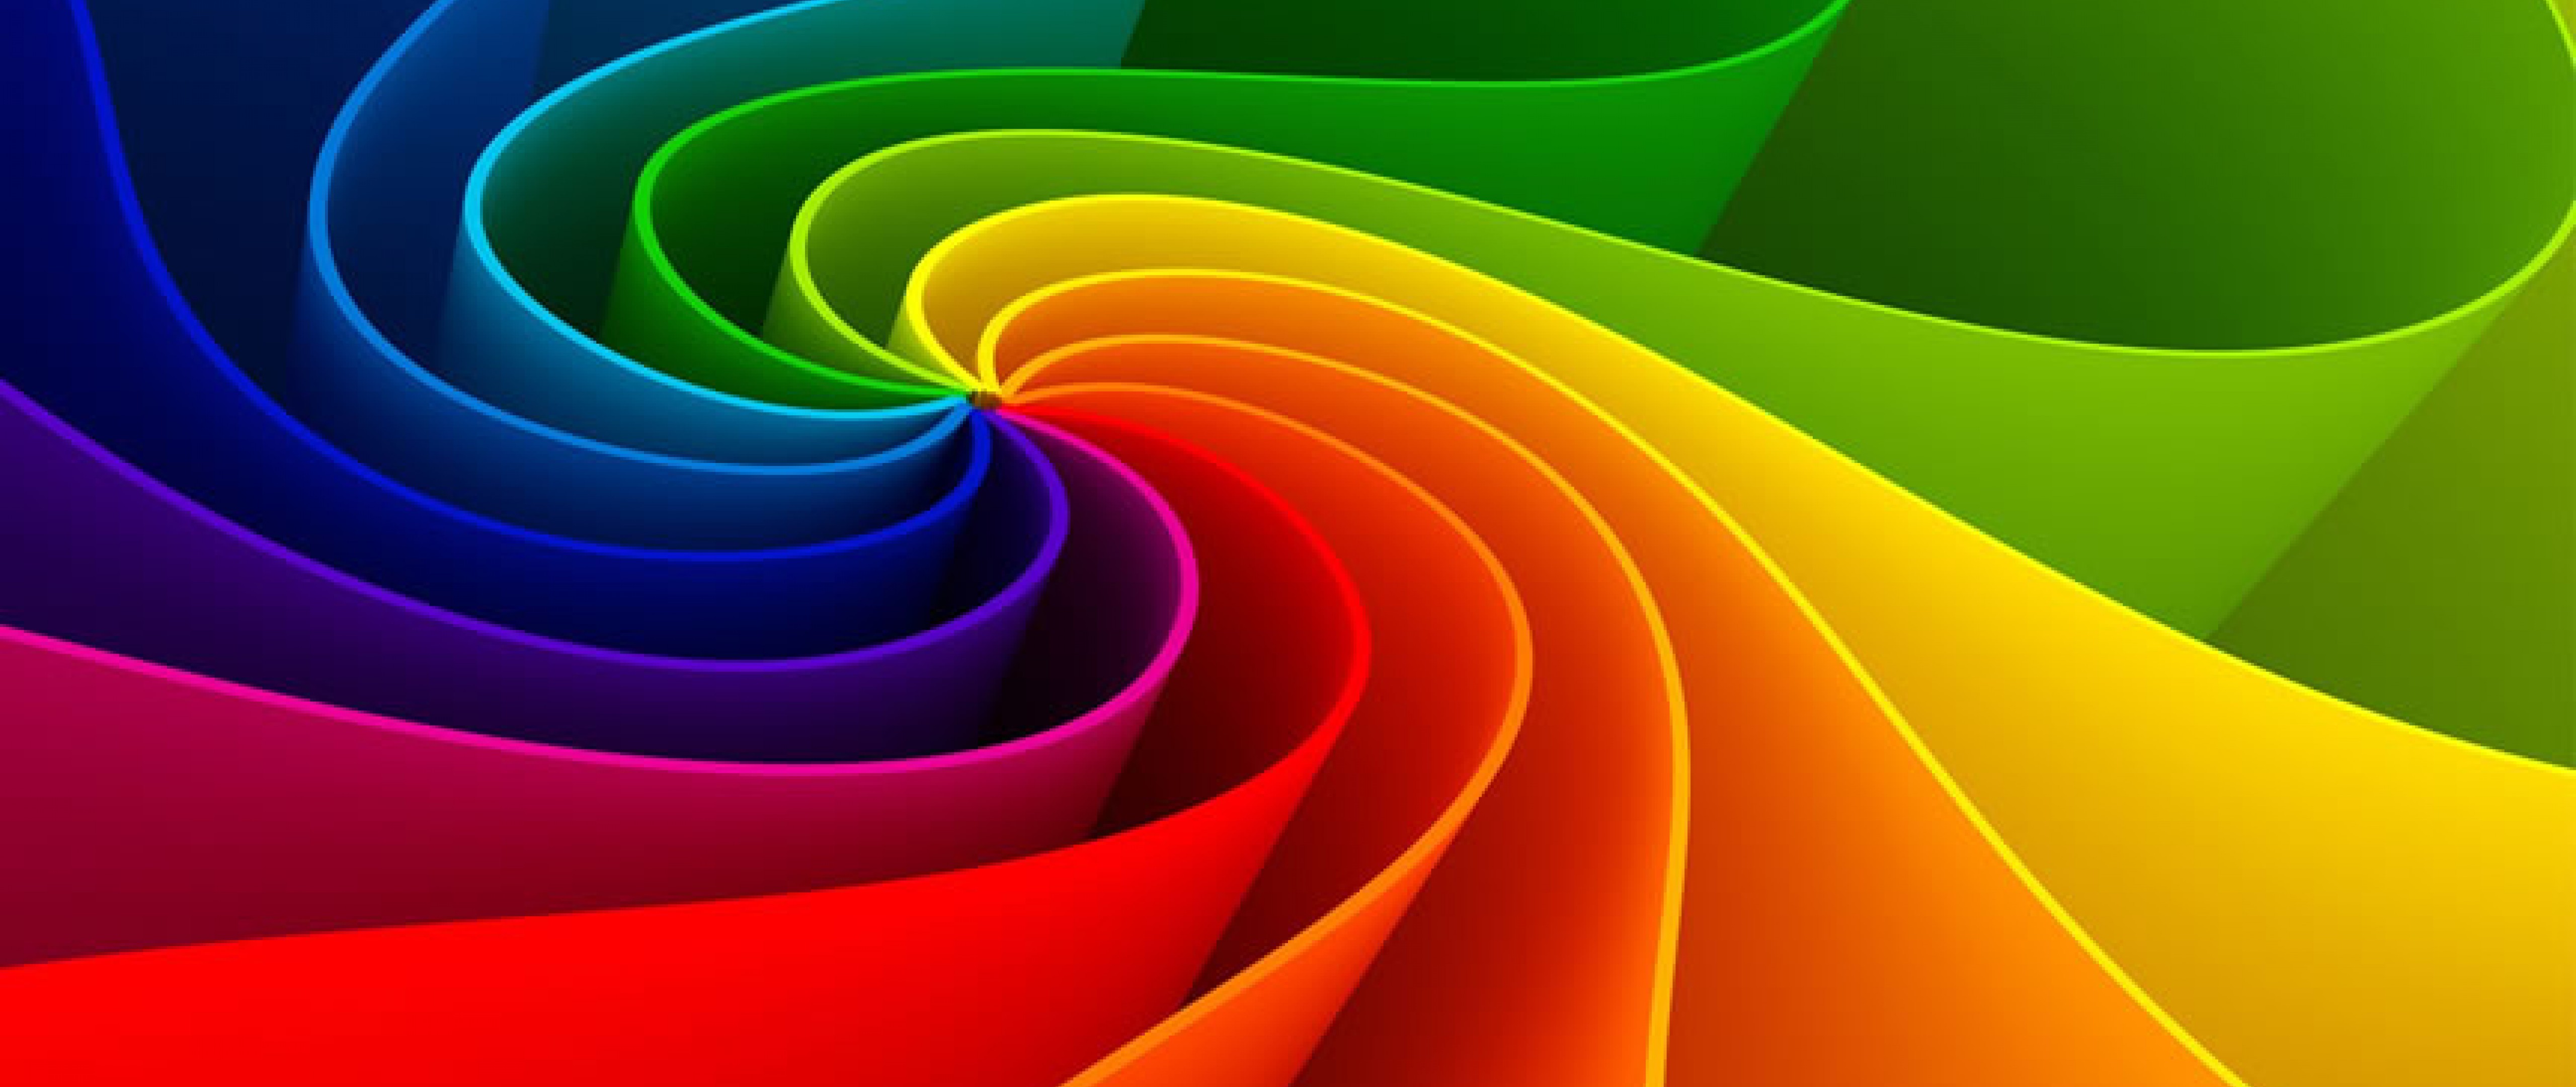 Abstract Coloured Line Wallpaper for Desktop and Mobiles 4K Ultra HD Wide TV - HD ...